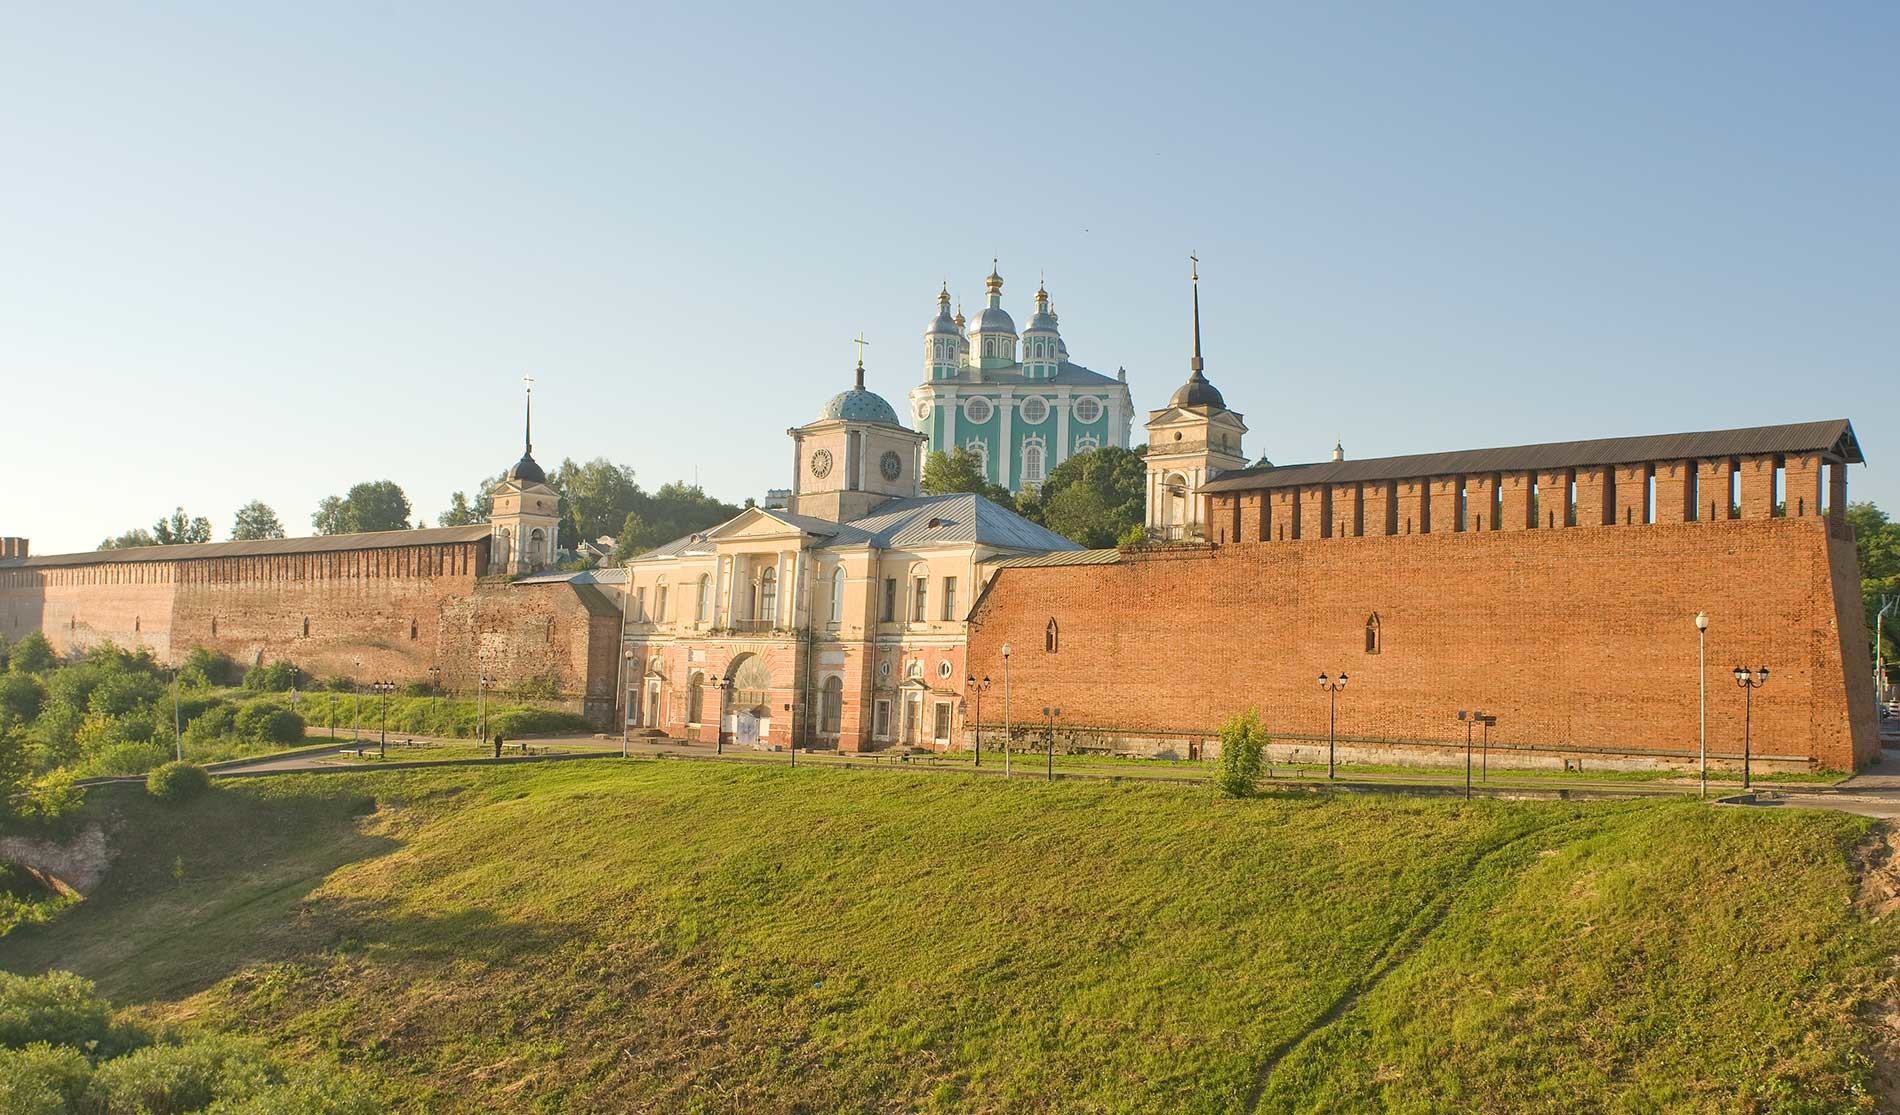 Smolensk citadel. North wall and Gate Church of the Hodegetria Icon of the Virgin. Northwest view from Central Bridge over Dnieper River. July 1, 2014